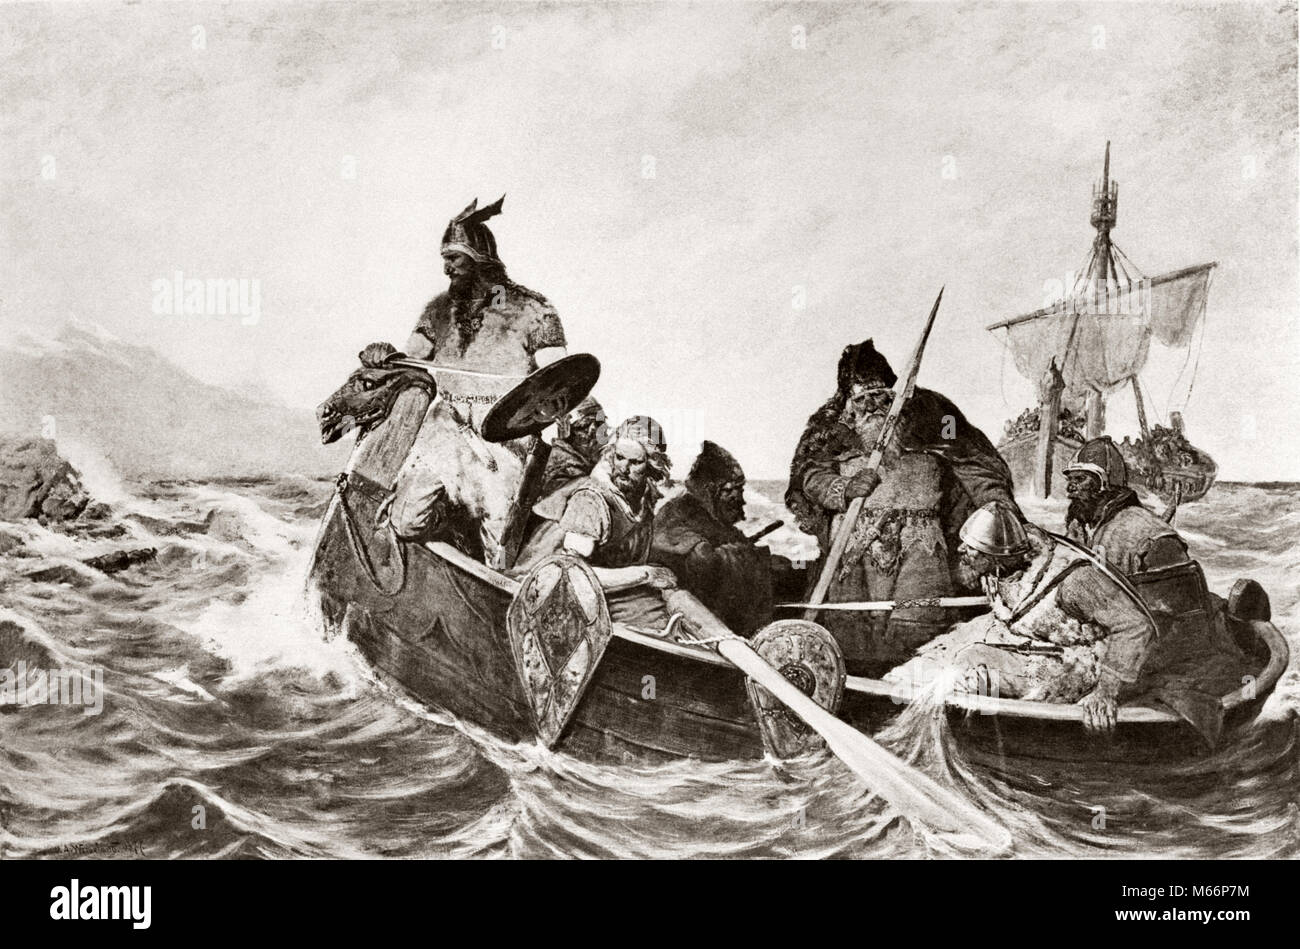 870 AD VIKINGS LEAD BY NADDODDR DISCOVERING NEW WORLD ILLUSTRATION BY O.A. WERGELAND - q57500 CPC001 HARS SEAMAN SHIP OCEAN VIKINGS WERGELAND Stock Photo